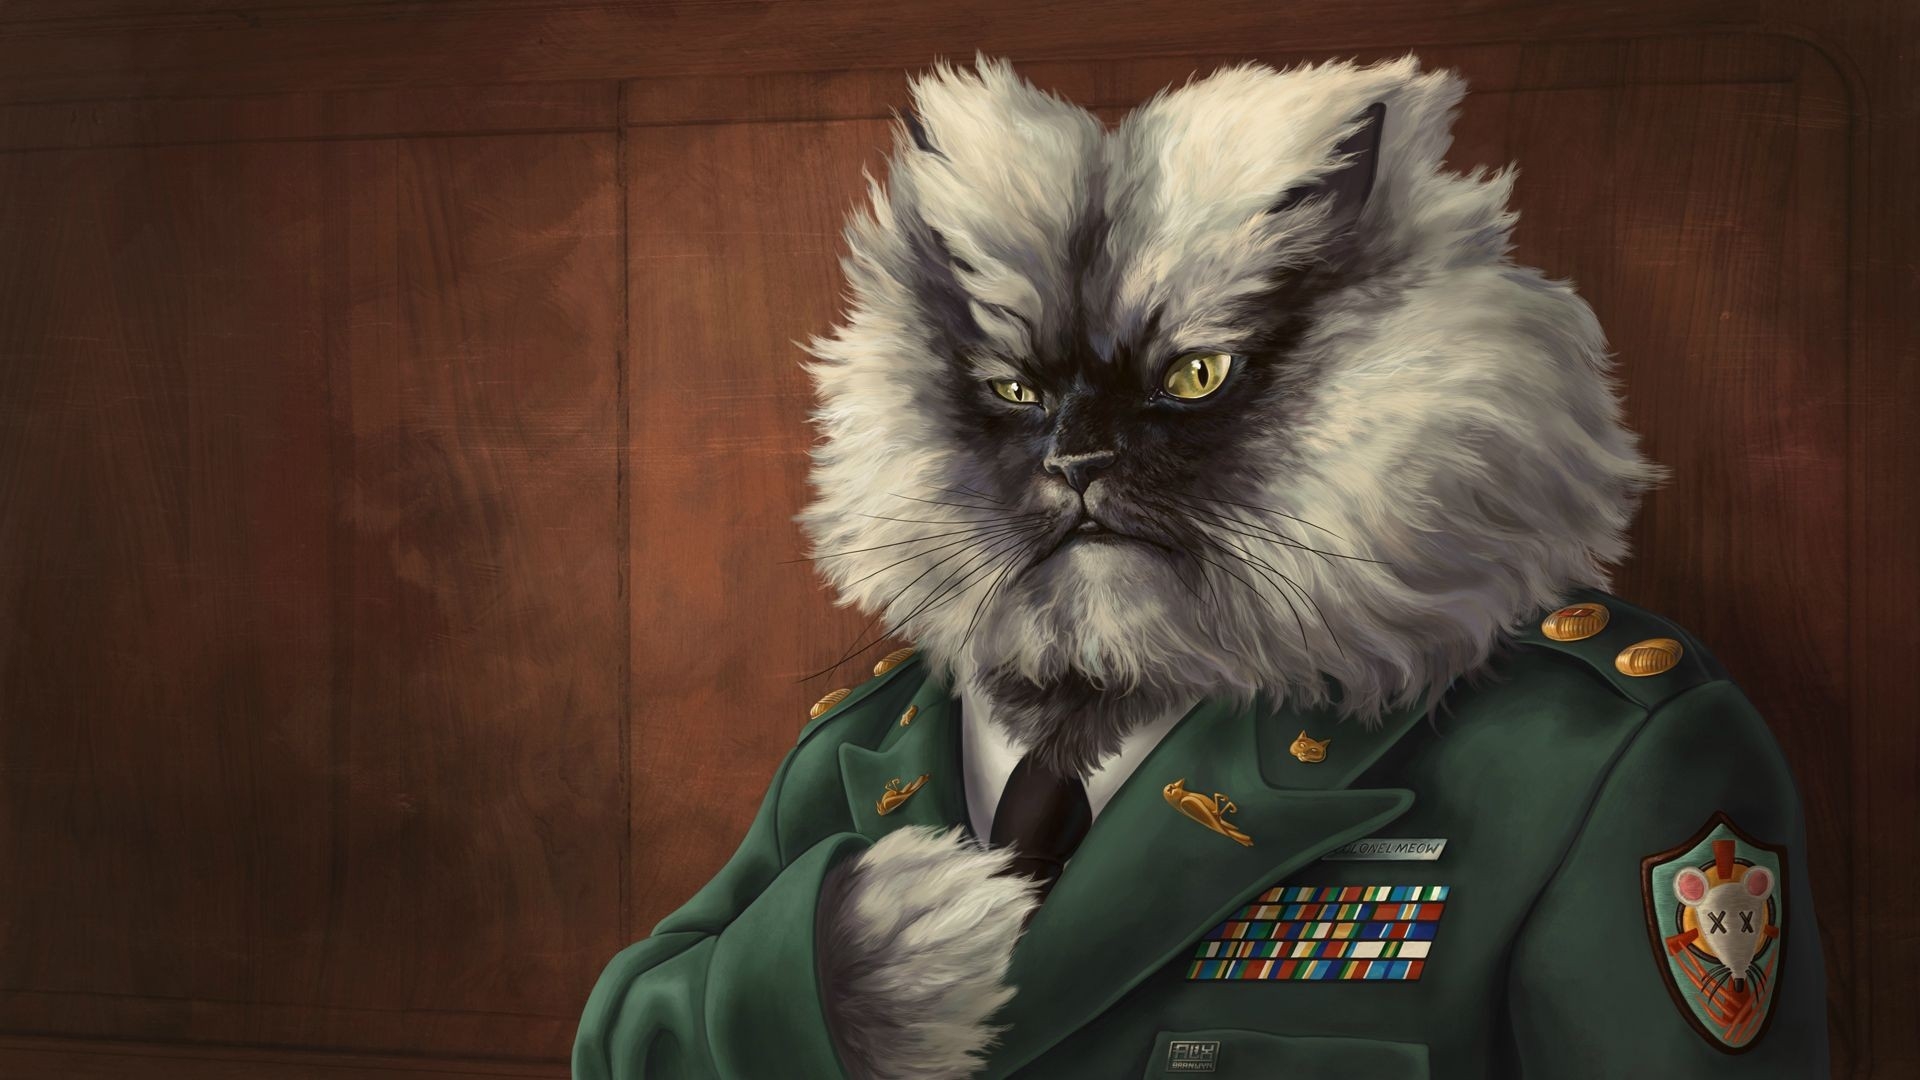 A cat in a military coat with orders.